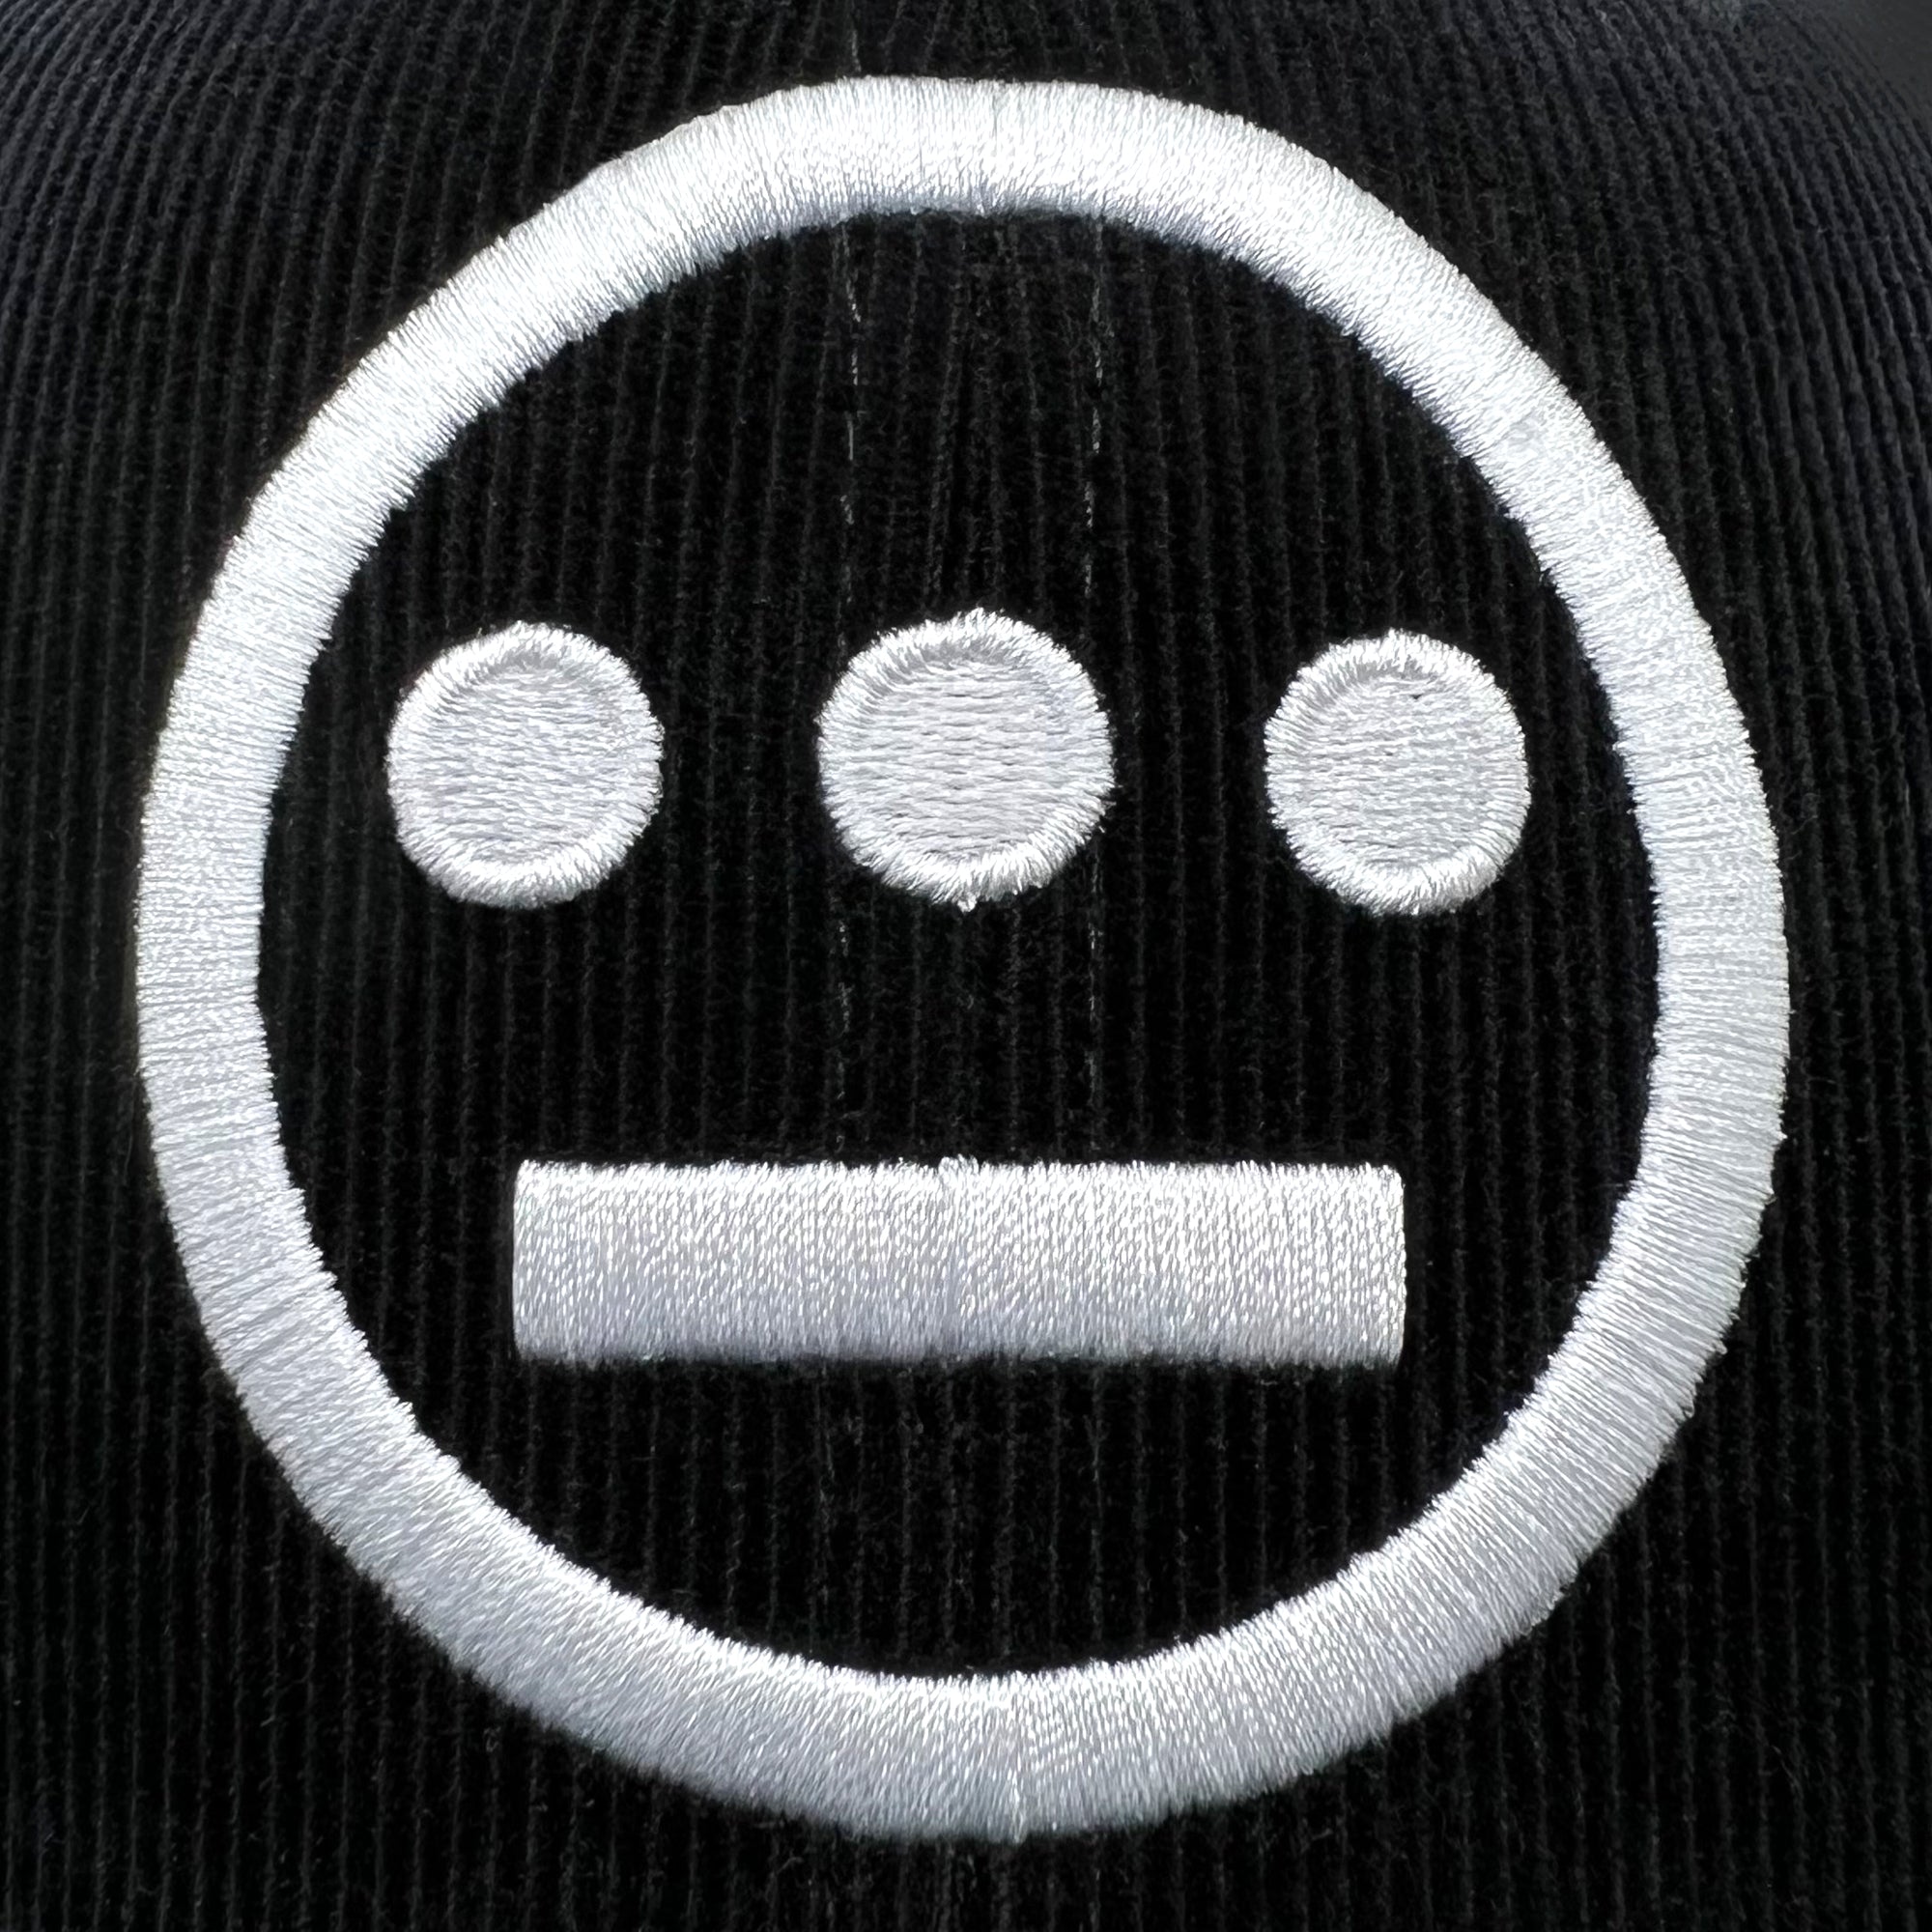 Detailed close up of embroidered white Hiero logo on black corduroy Mitchell & Ness snapback hat.